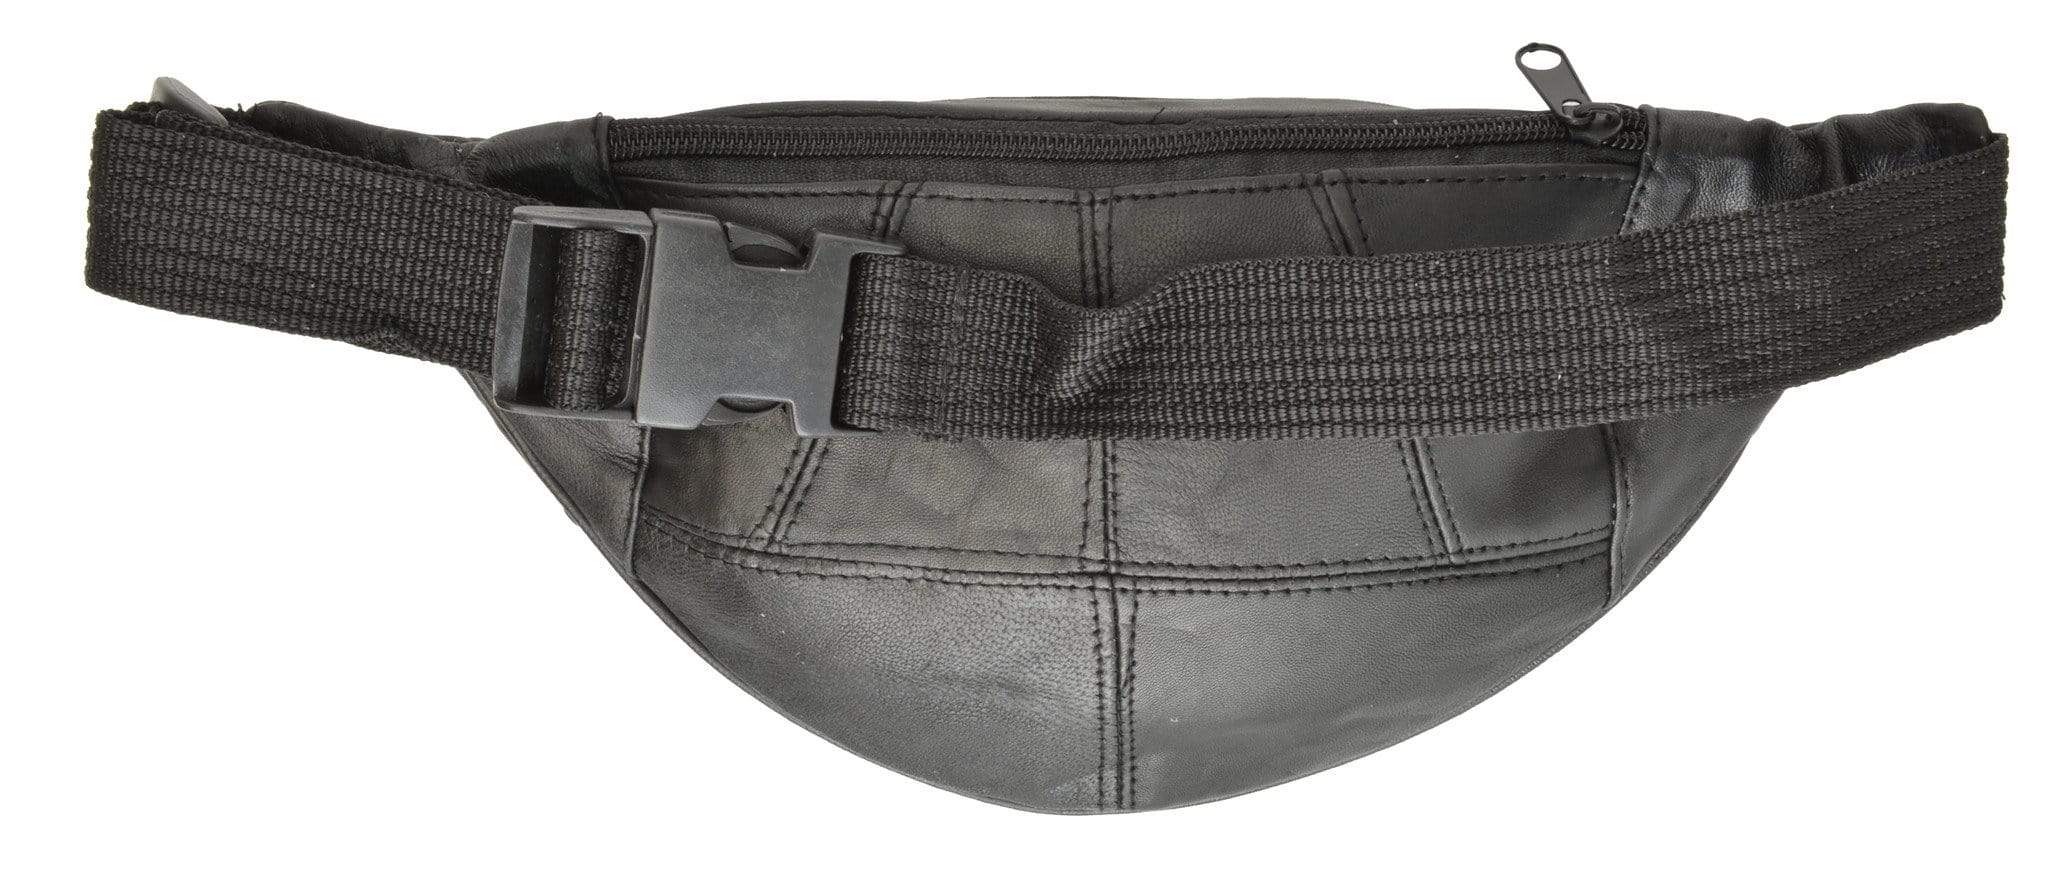 Leather Fanny Pack | Leather Fanny Packs, Waist Bags & Belt Bags - image 5 of 7